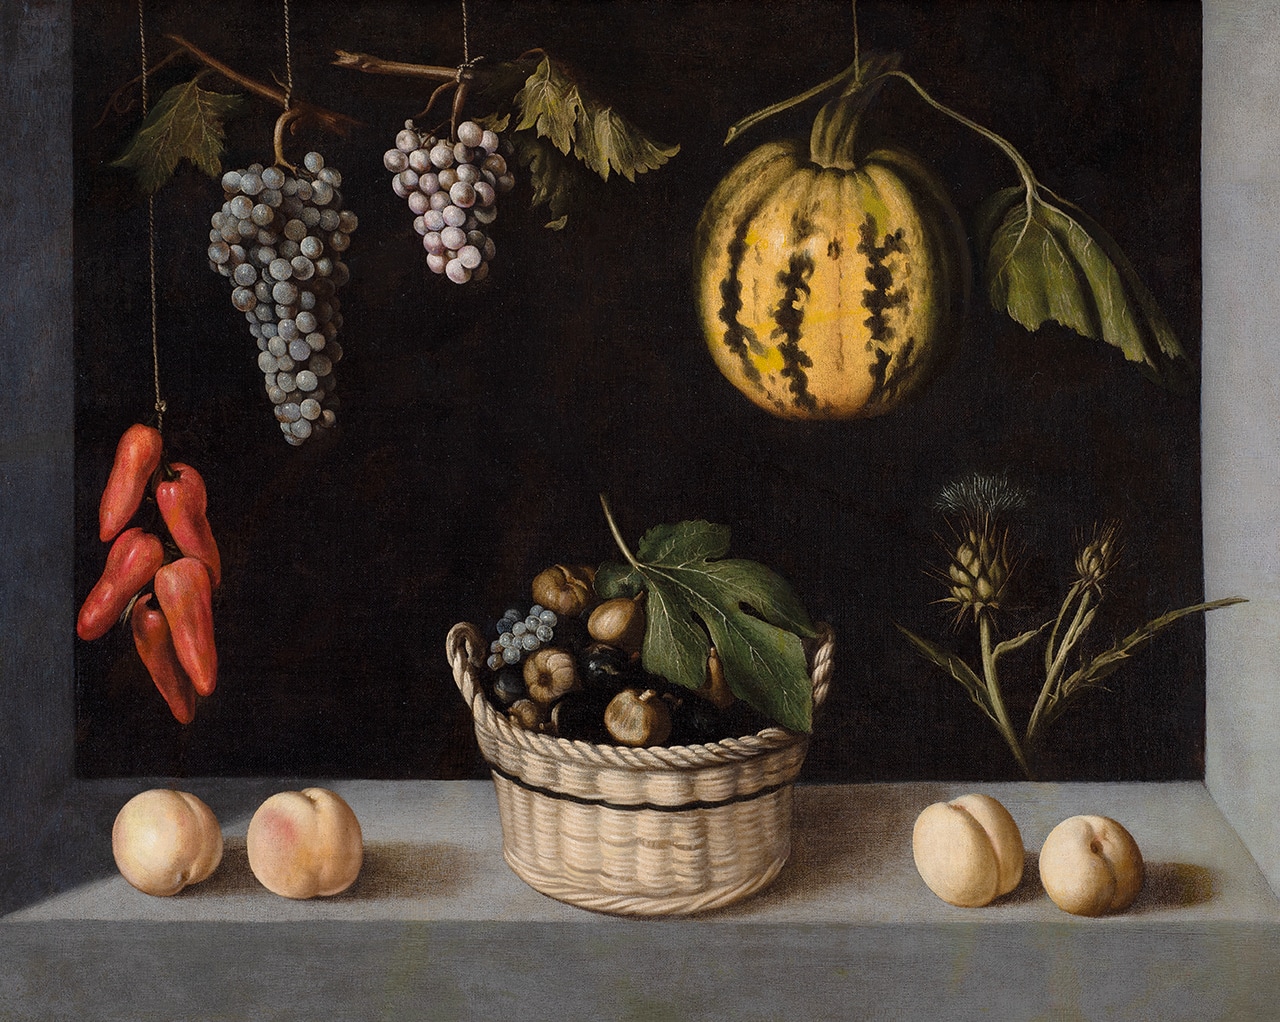 Still Life with Basket of Fruit, Melon, and Grapes